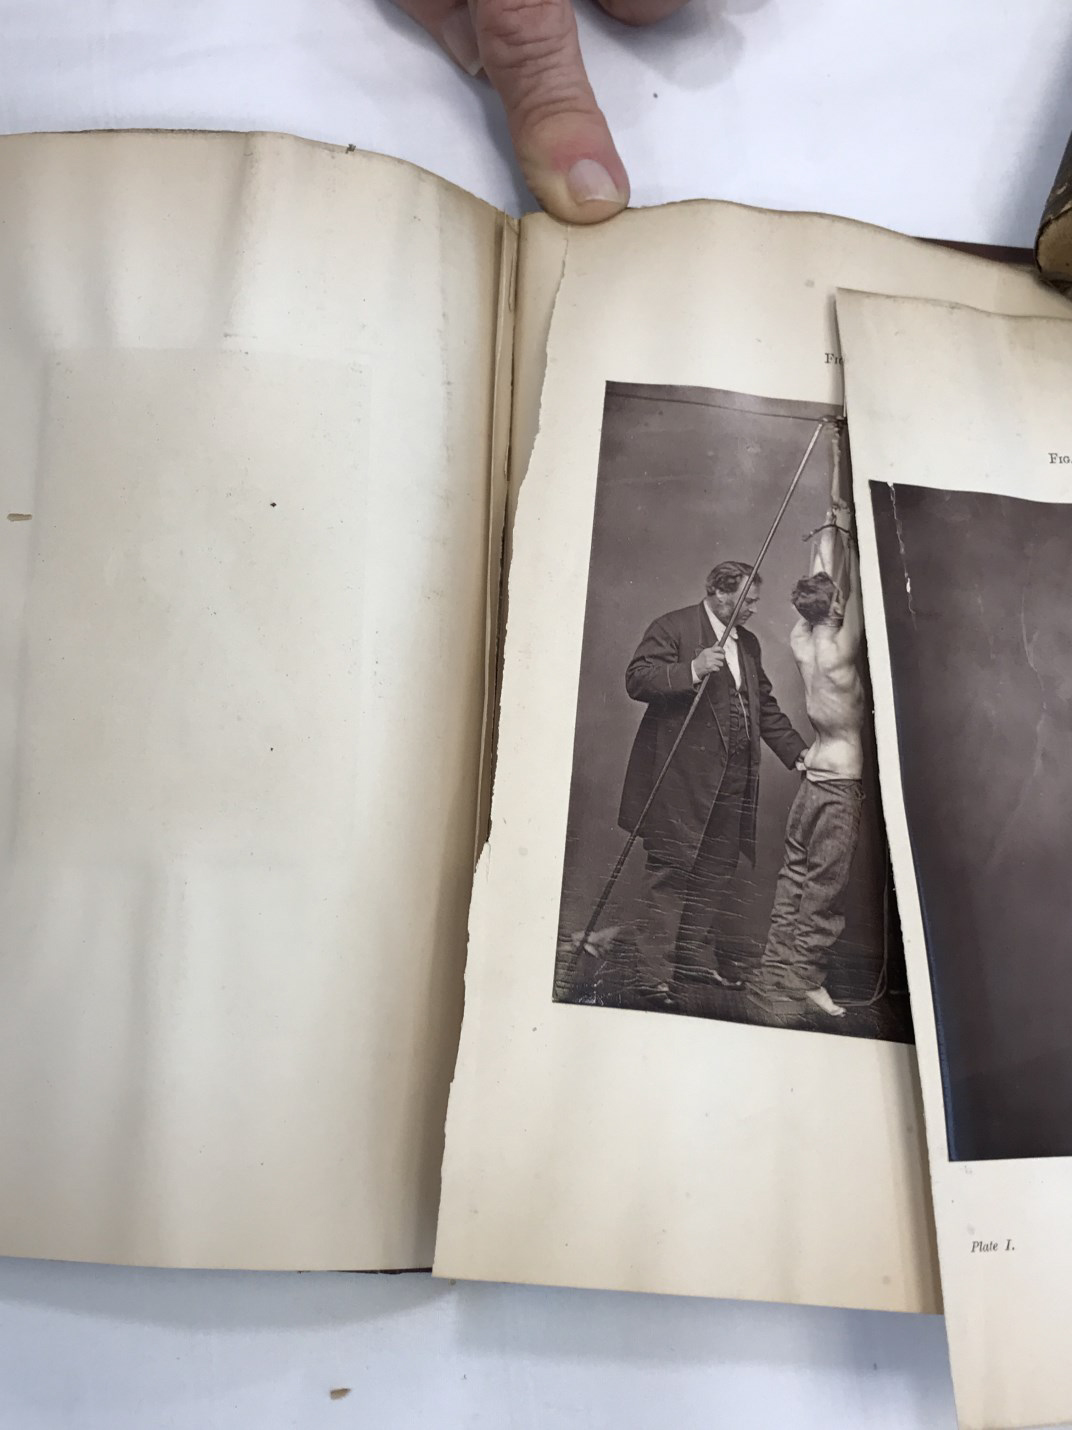 repairs needed to photographic illustrations and torn pages